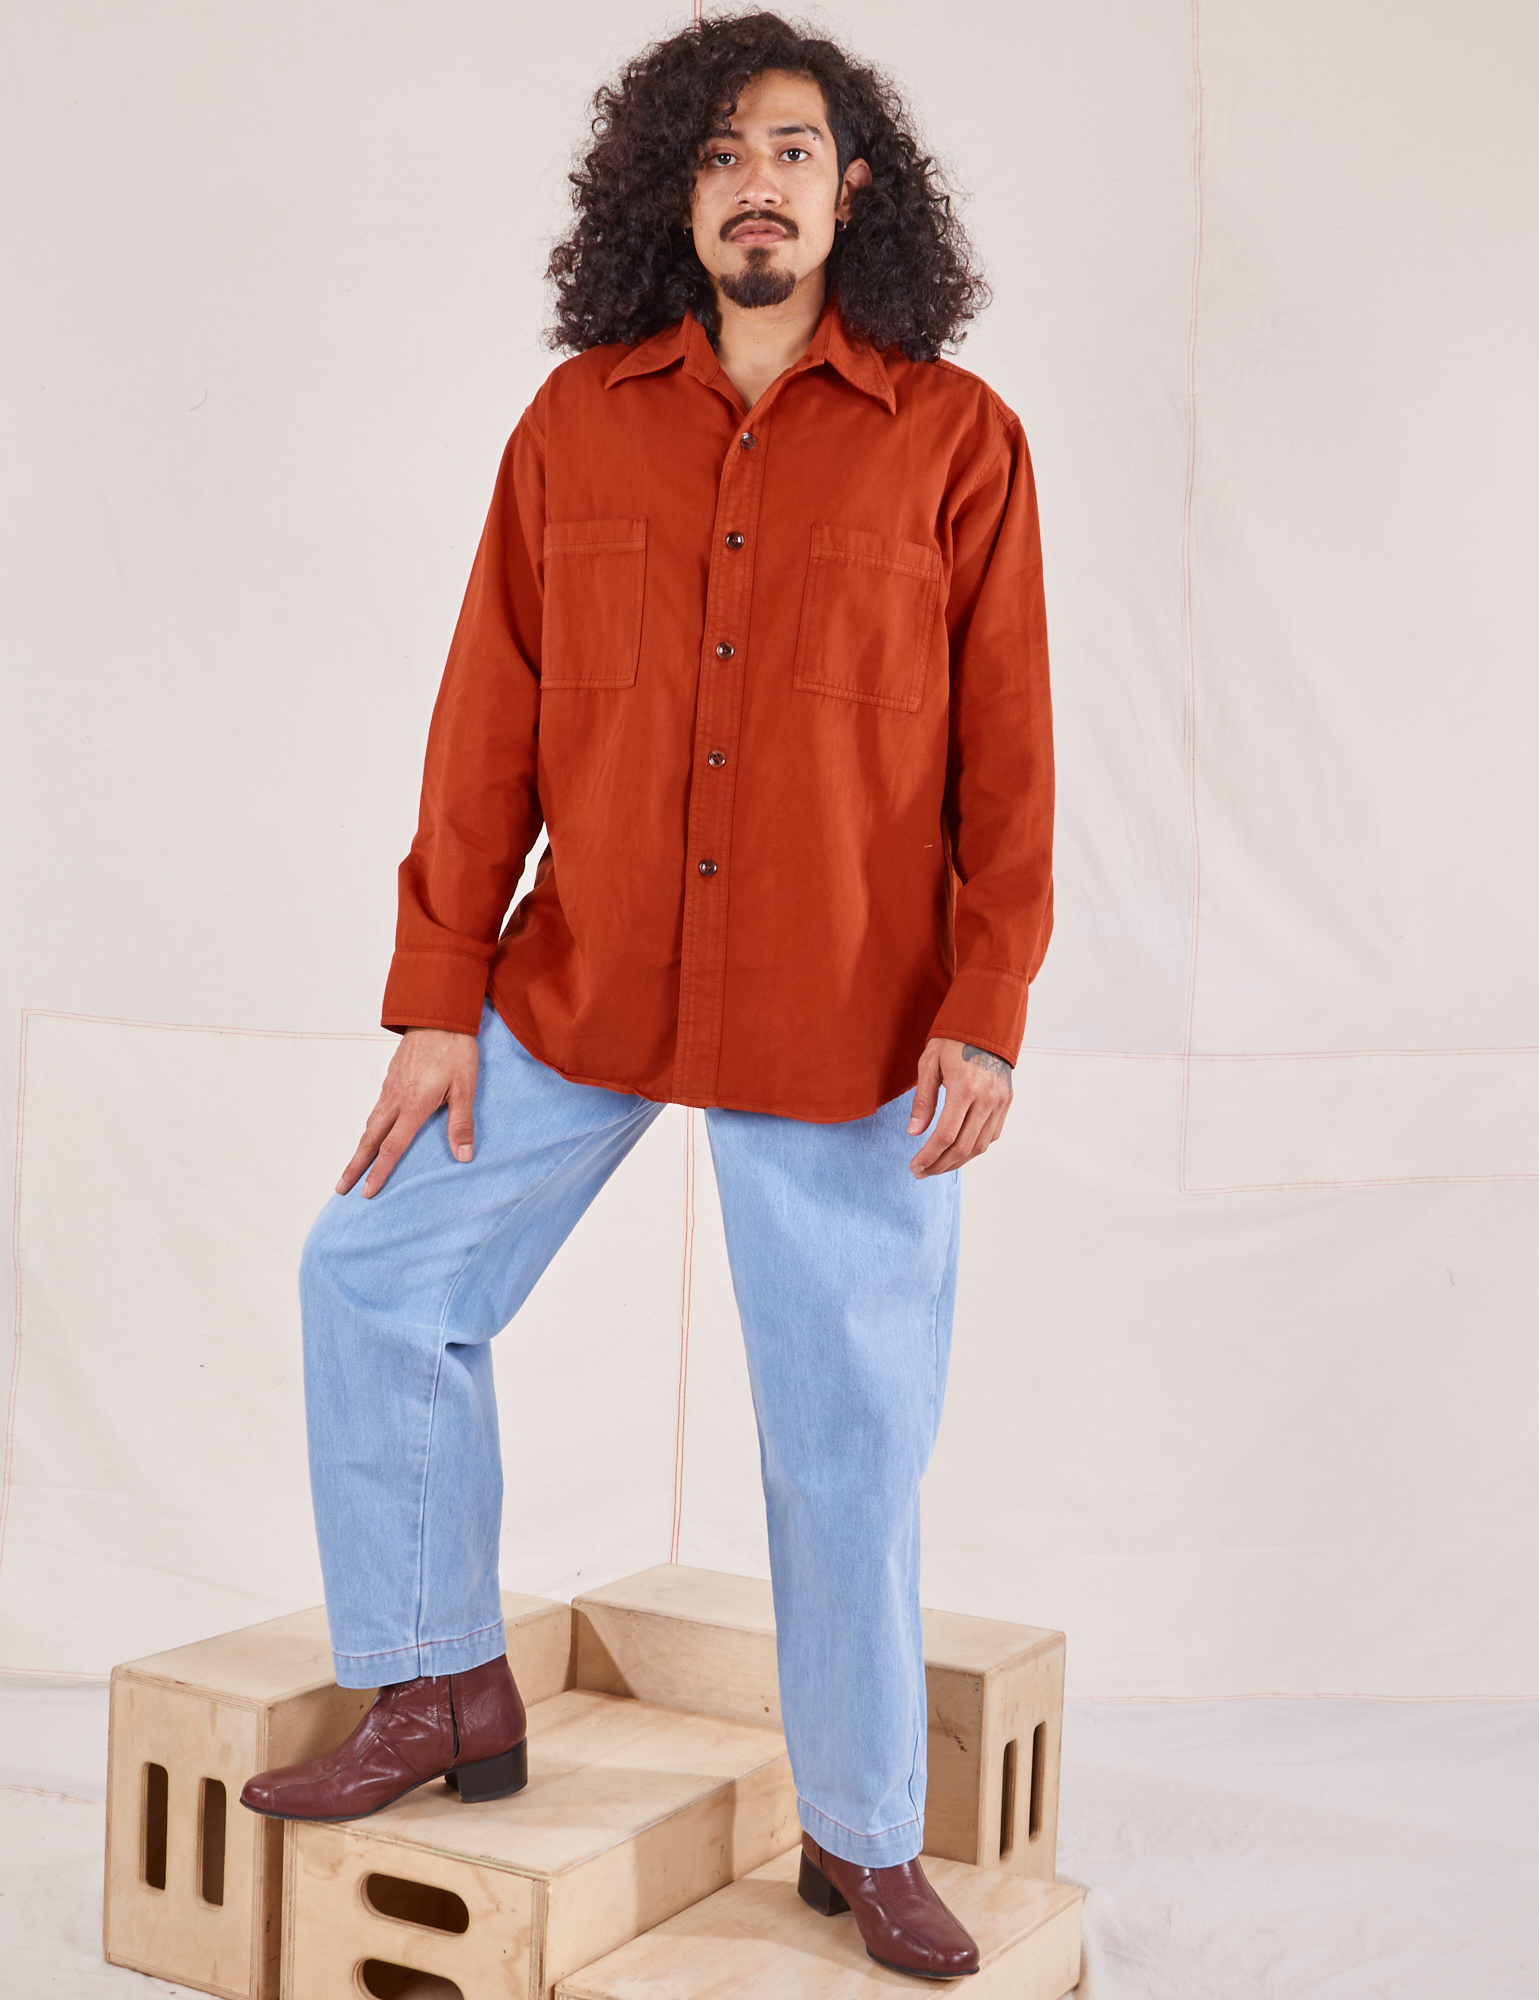 Jesse is wearing Oversize Overshirt in Paprika and light wash Trouser Jeans